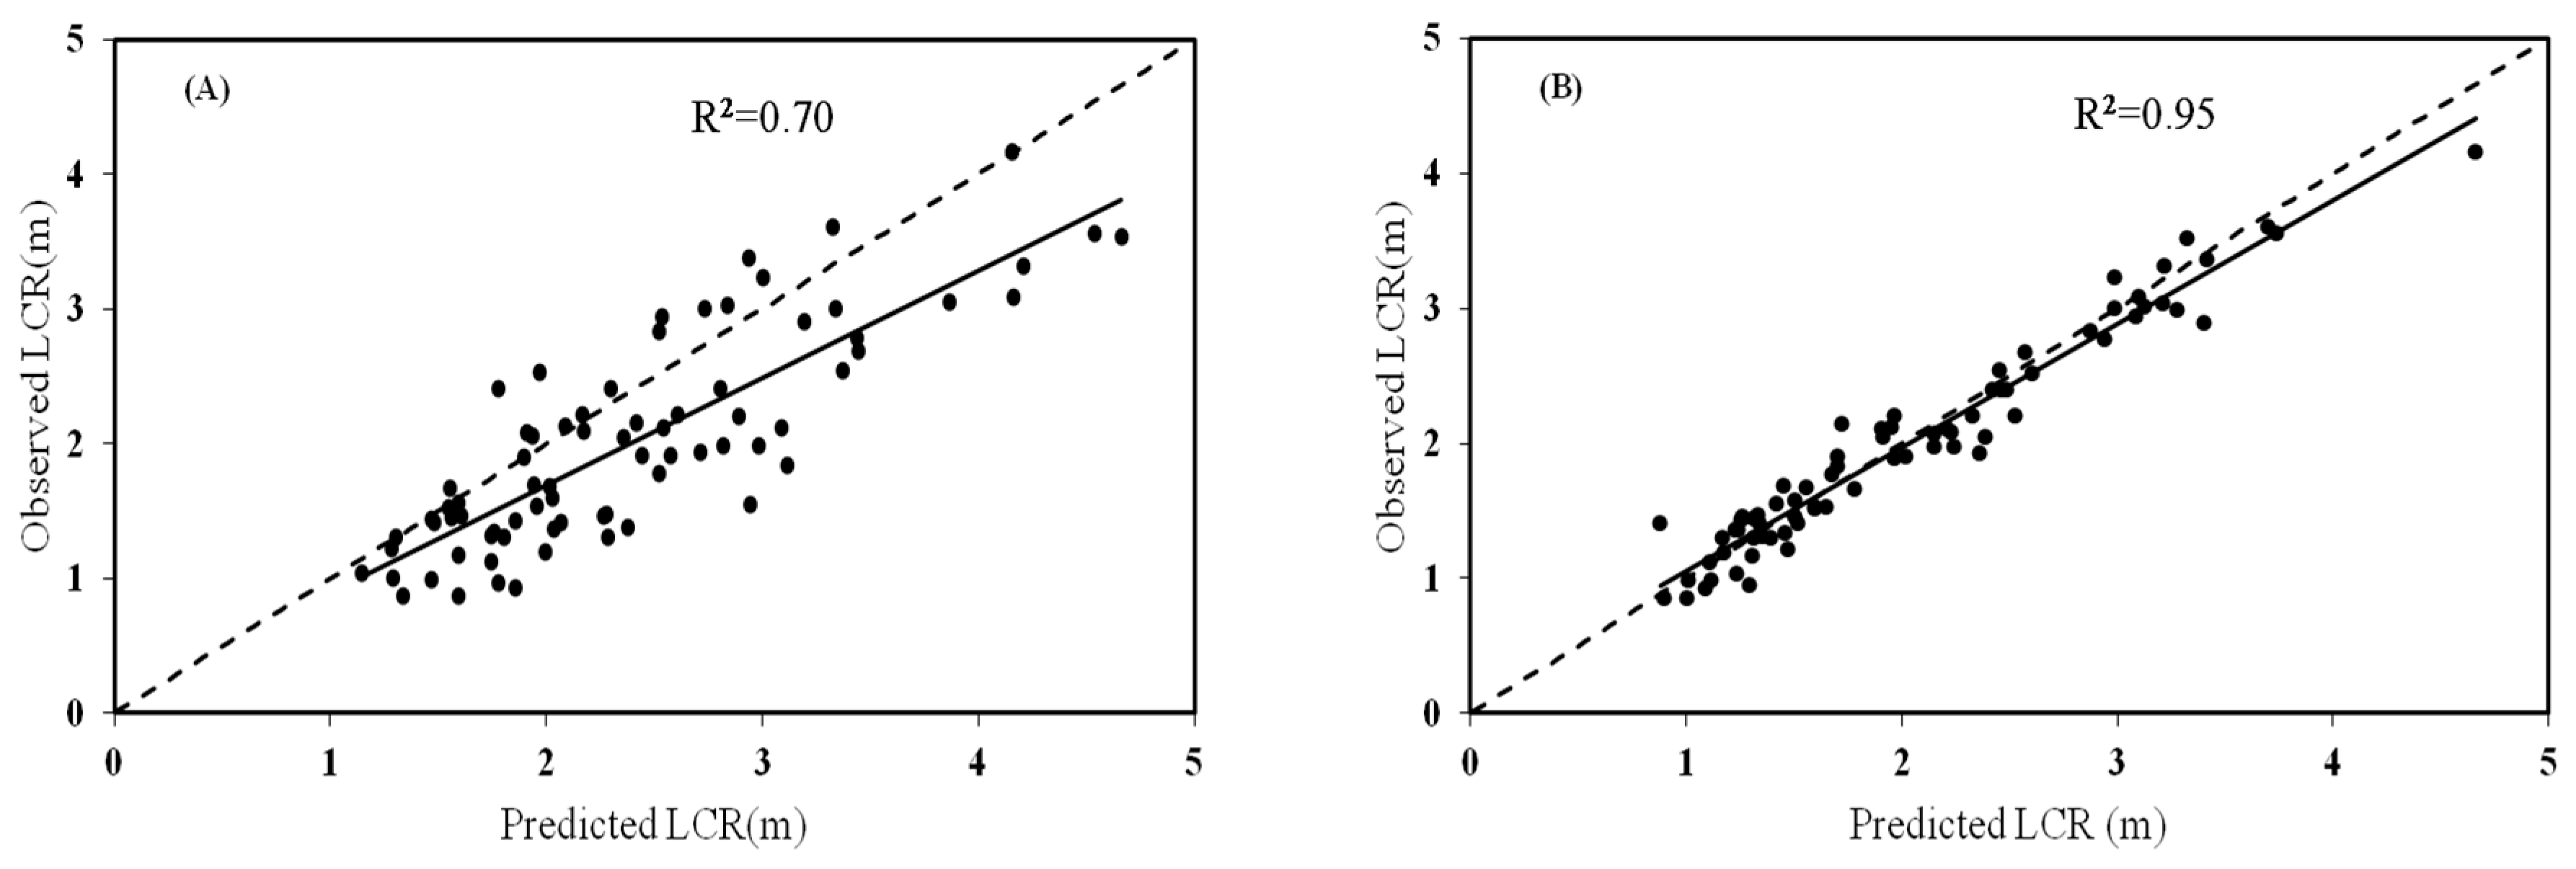 Forests | Free Full-Text | Using Linear Mixed-Effects Models with Quantile  Regression to Simulate the Crown Profile of Planted Pinus sylvestris var.  Mongolica Trees | HTML